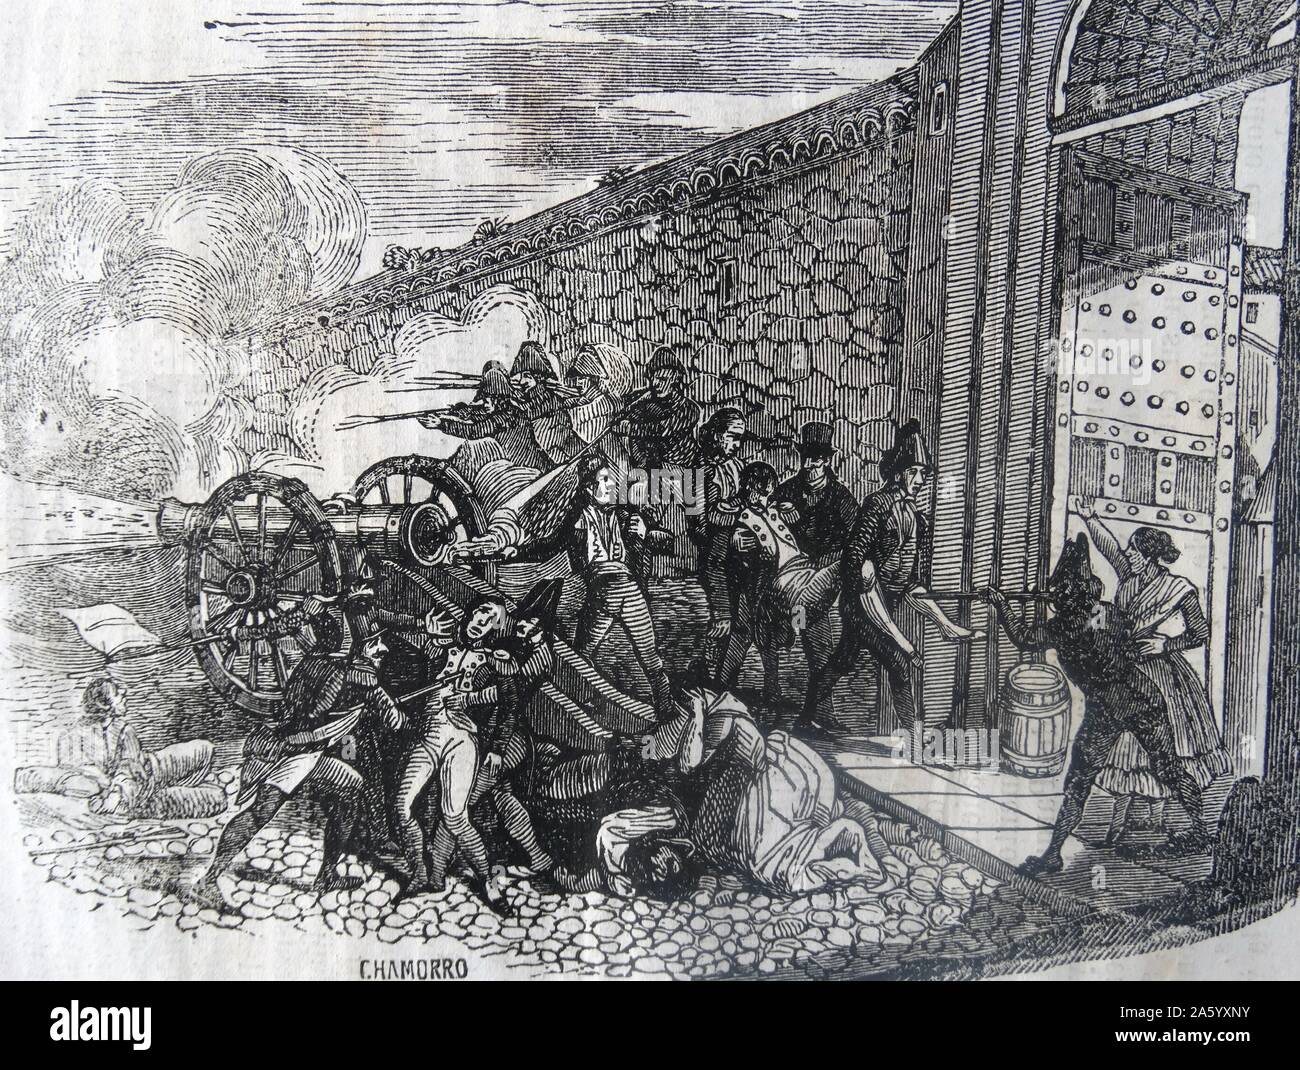 Engraving depicting the death of Luis Daoíz y Torres (1767-1808) Spanish artillery officer and one of the leaders of the Dos de Mayo Uprising that signalled the start of the Spanish War of Independence and Pedro Velarde y Santillán (1779-1808) Spanish artillery captain famous for his heroic death in the Dos de Mayo uprisings against the French occupation of Madrid. Dated 1808 Stock Photo